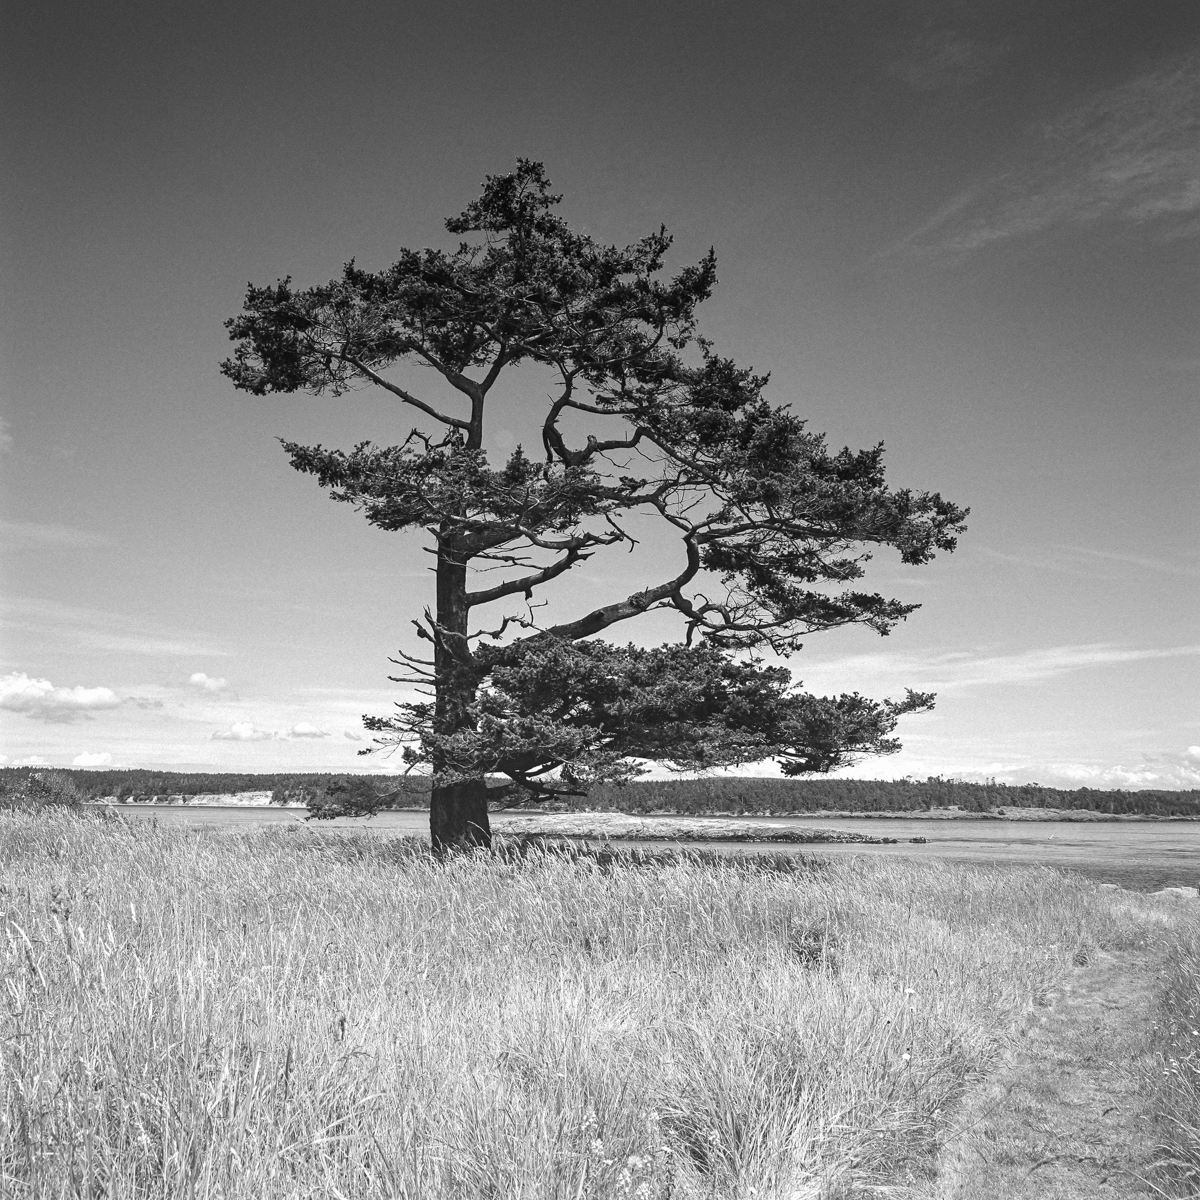 Landscape photo of a large tree in a field